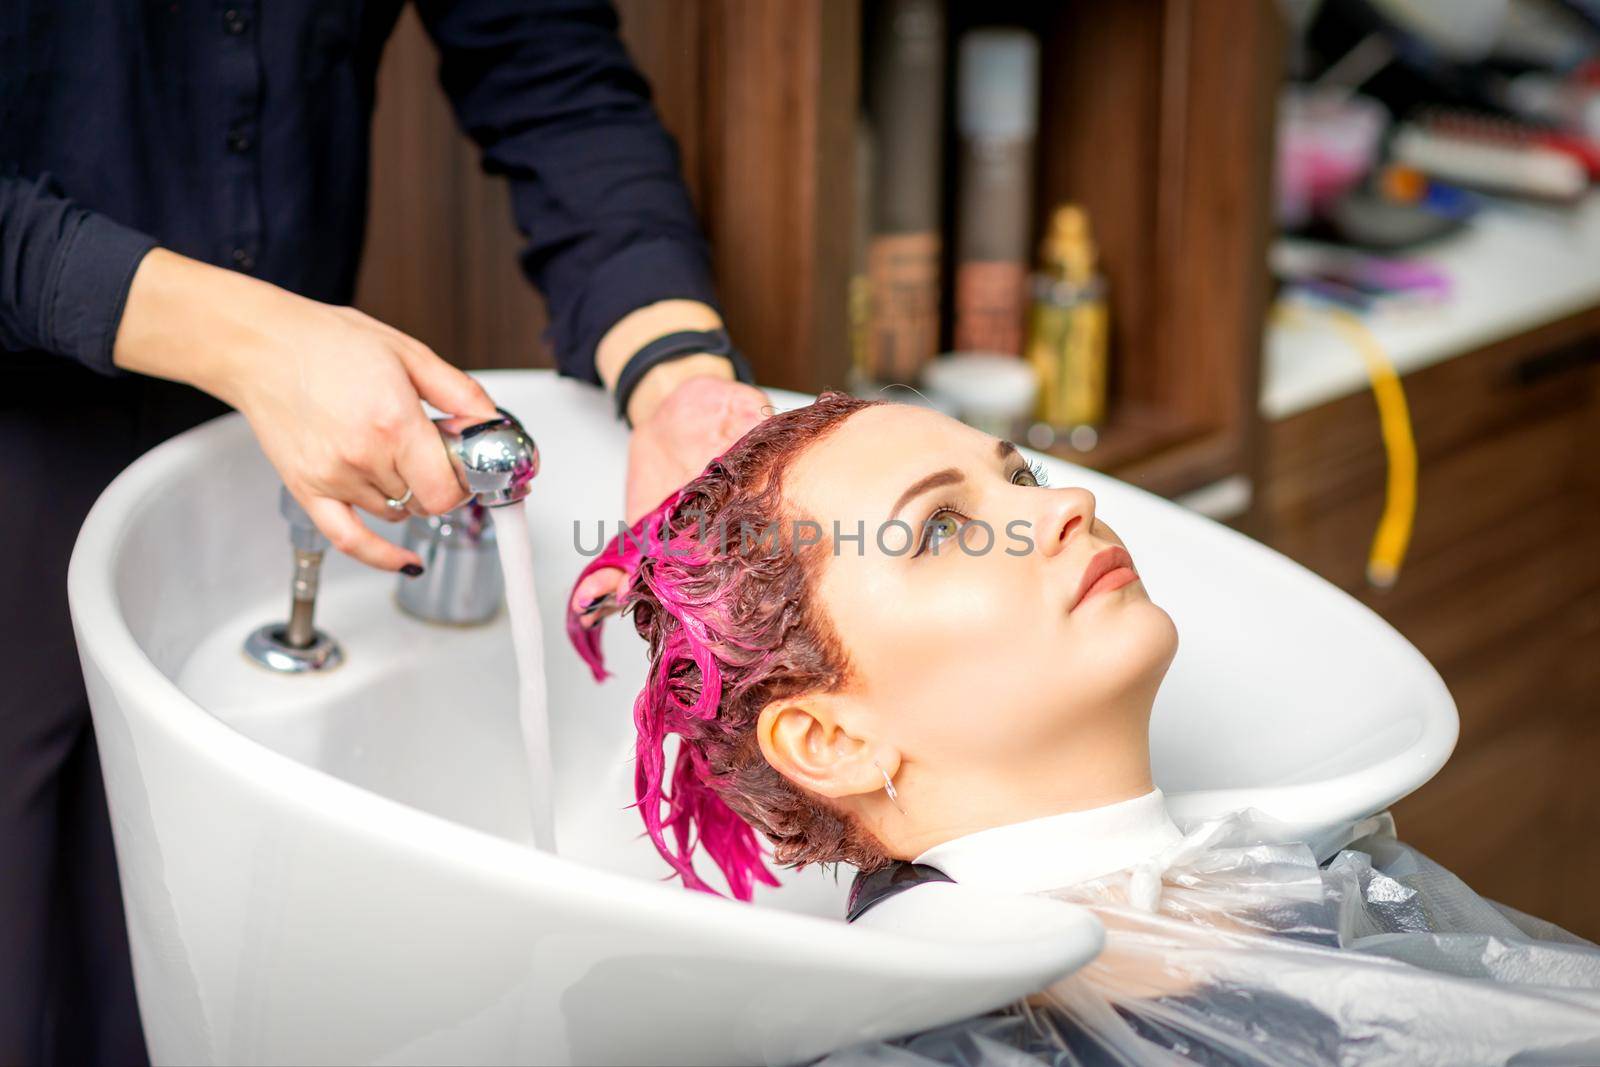 Washing dyed female hair. A young caucasian woman having her hair washed in a beauty salon. Professional hairdresser washes pink color paint off of a customer's hair